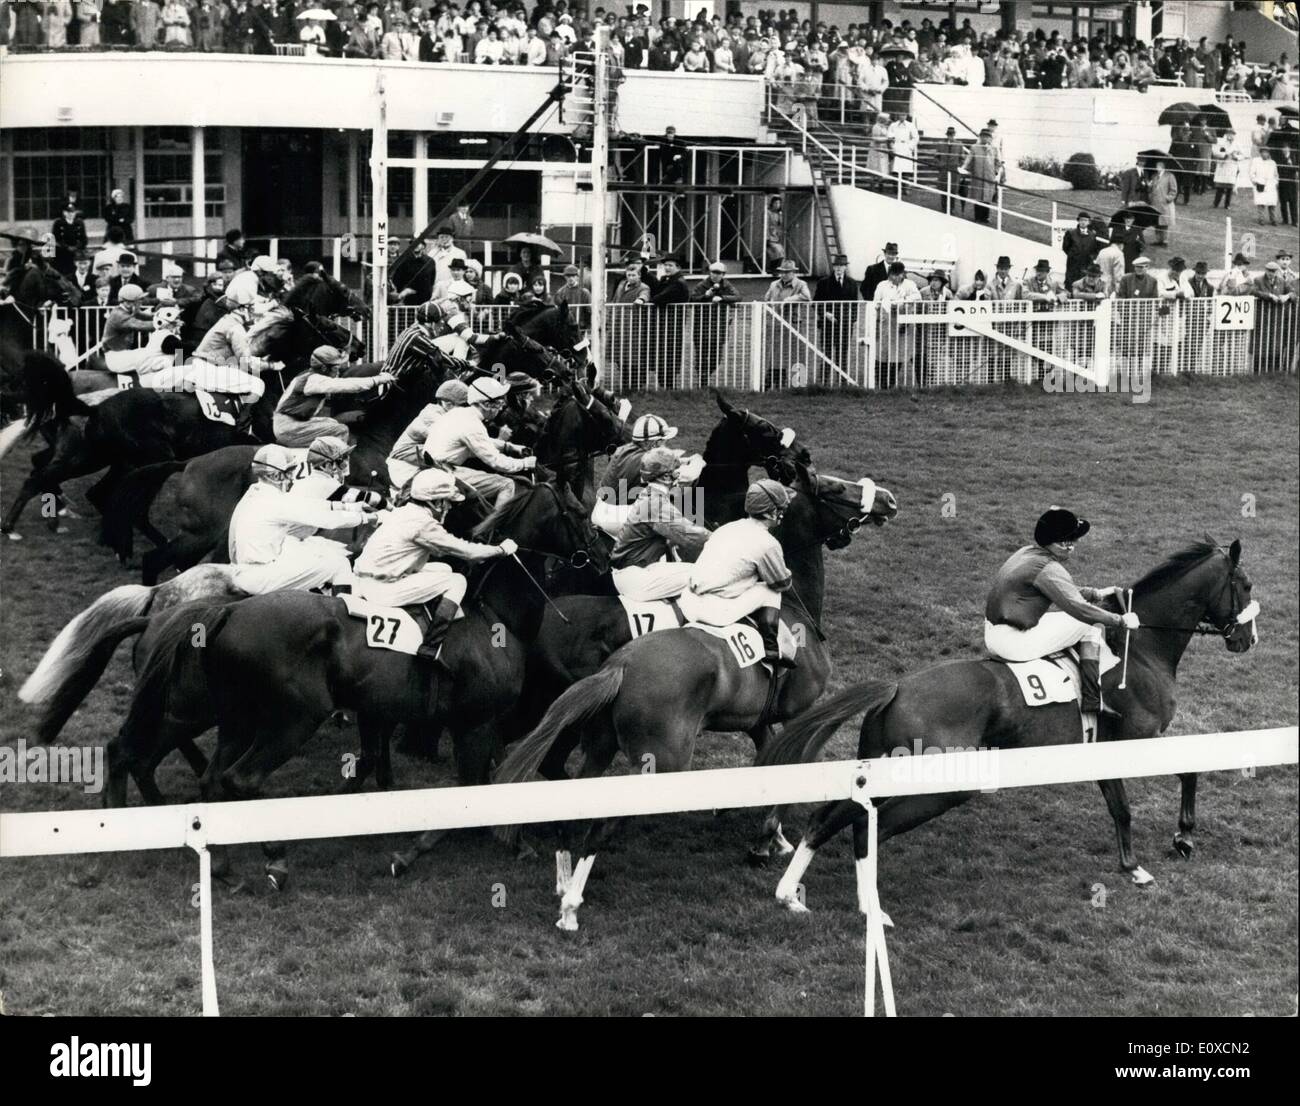 Apr. 04, 1966 - Racing at Epsom. the great metropolitan: Photo shows the scene at Epsom today, at the start of the Great Metropolitan Handicap, run over 2m 2f. The race was won by Cullen (F. Masser(; with Gypsy Refrain (M.L. Thomas), 2nd, and Colonel Imp (C. Gissing) 3rd. Stock Photo